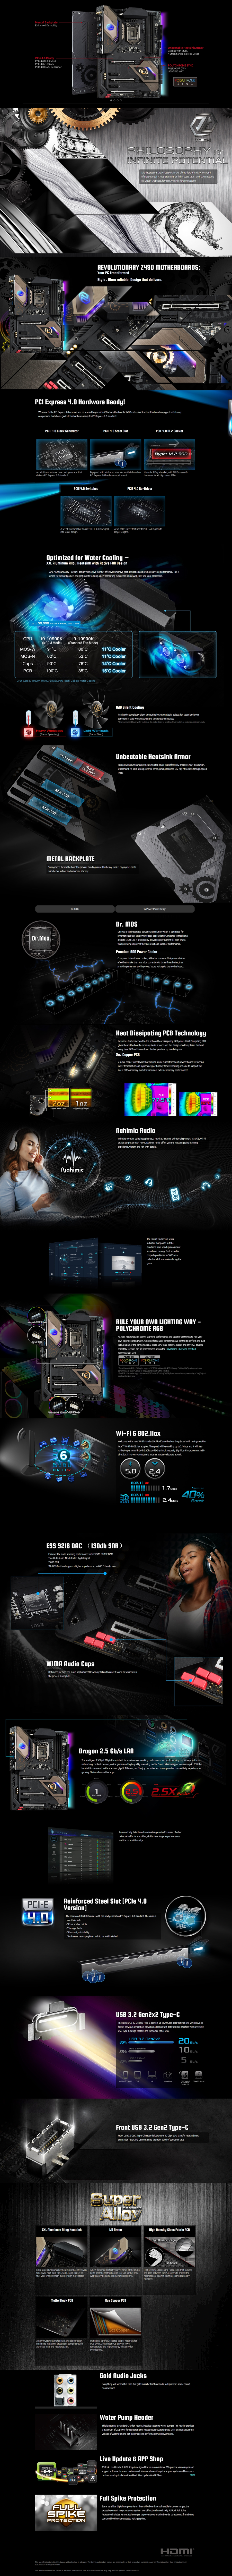 A large marketing image providing additional information about the product ASRock Z490 Taichi LGA1200 ATX Desktop Motherboard - Additional alt info not provided